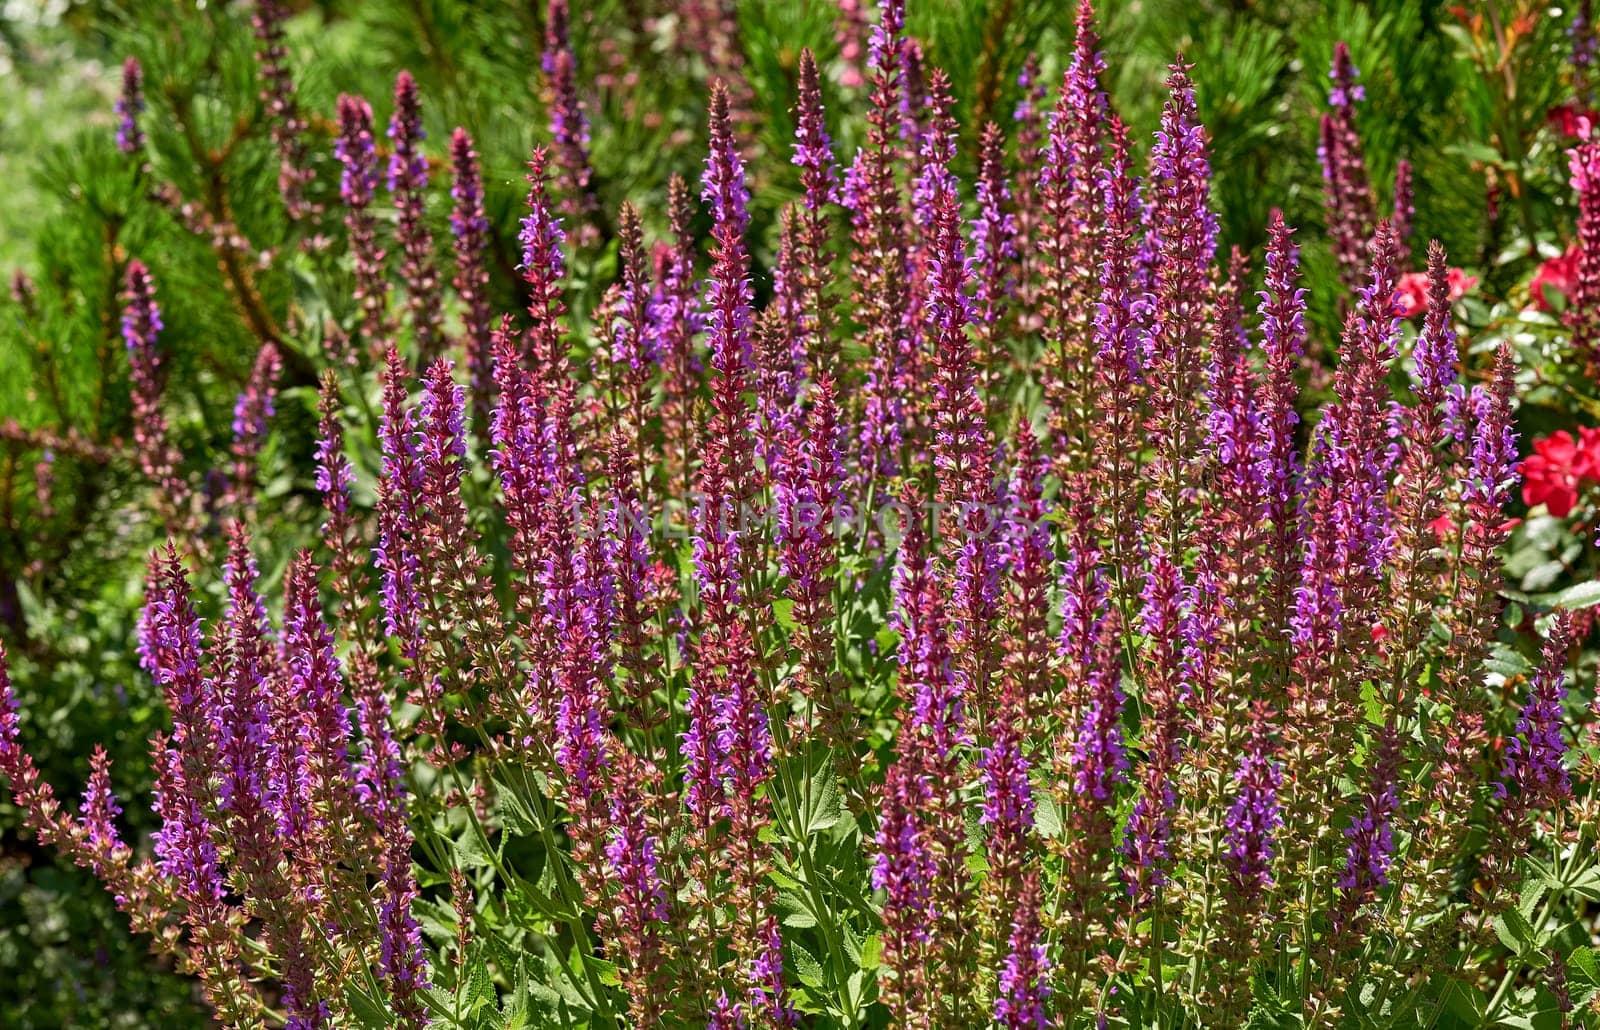 a widely distributed plant of the mint family, especially in gardening a bedding plant cultivated for its spikes of bright flowers.